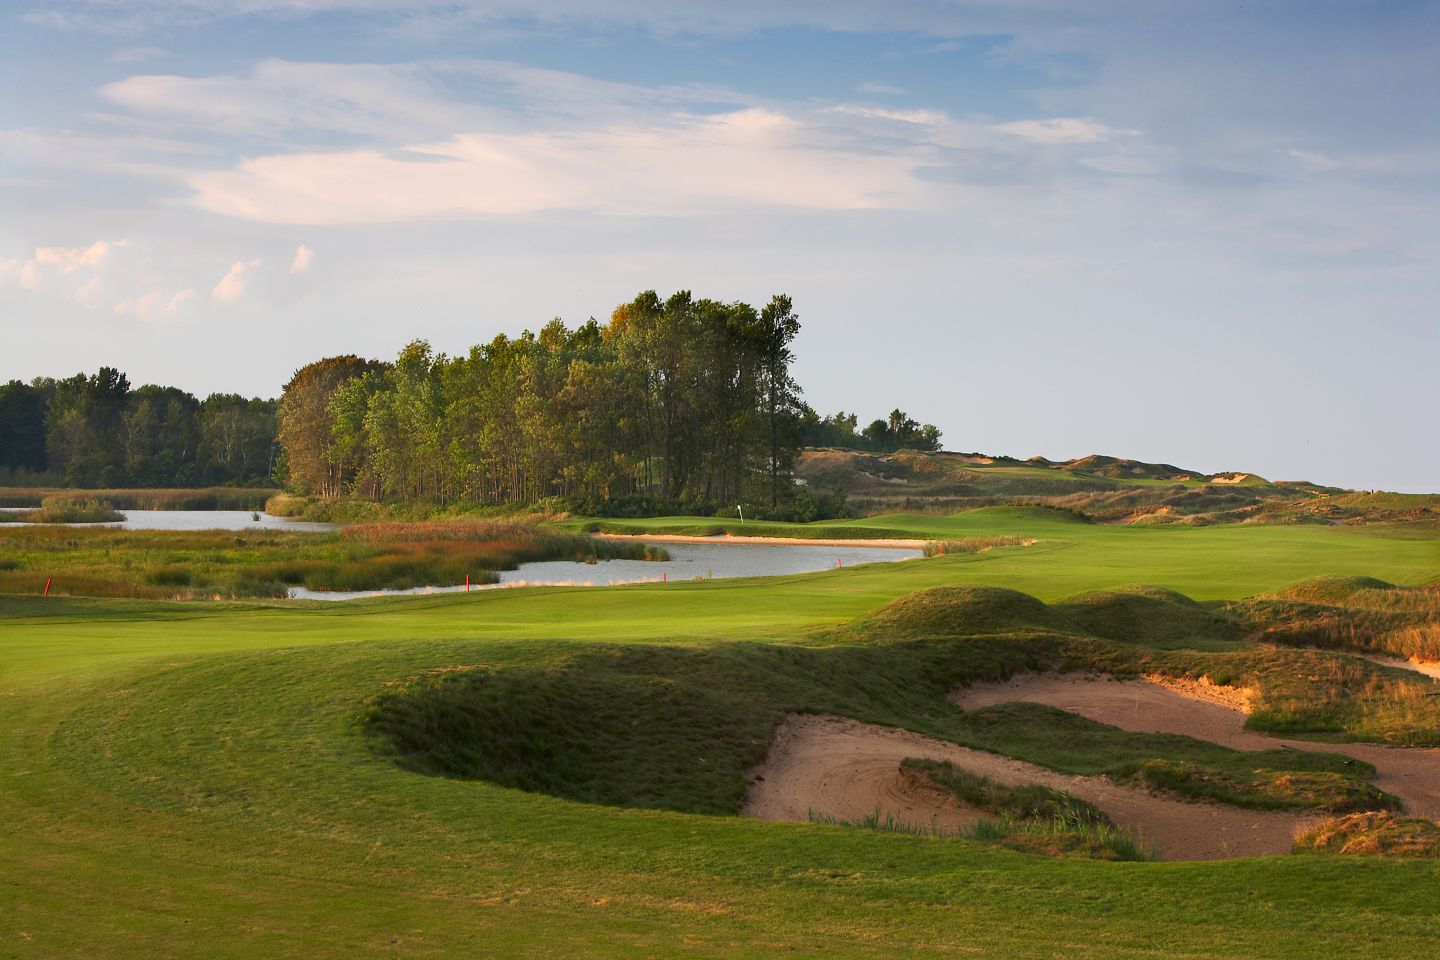 The fifth hole on the Straits Course at Whistling Stratis is the longer of the two par 5s on the front nine,  demanding accuracy from tee to green.